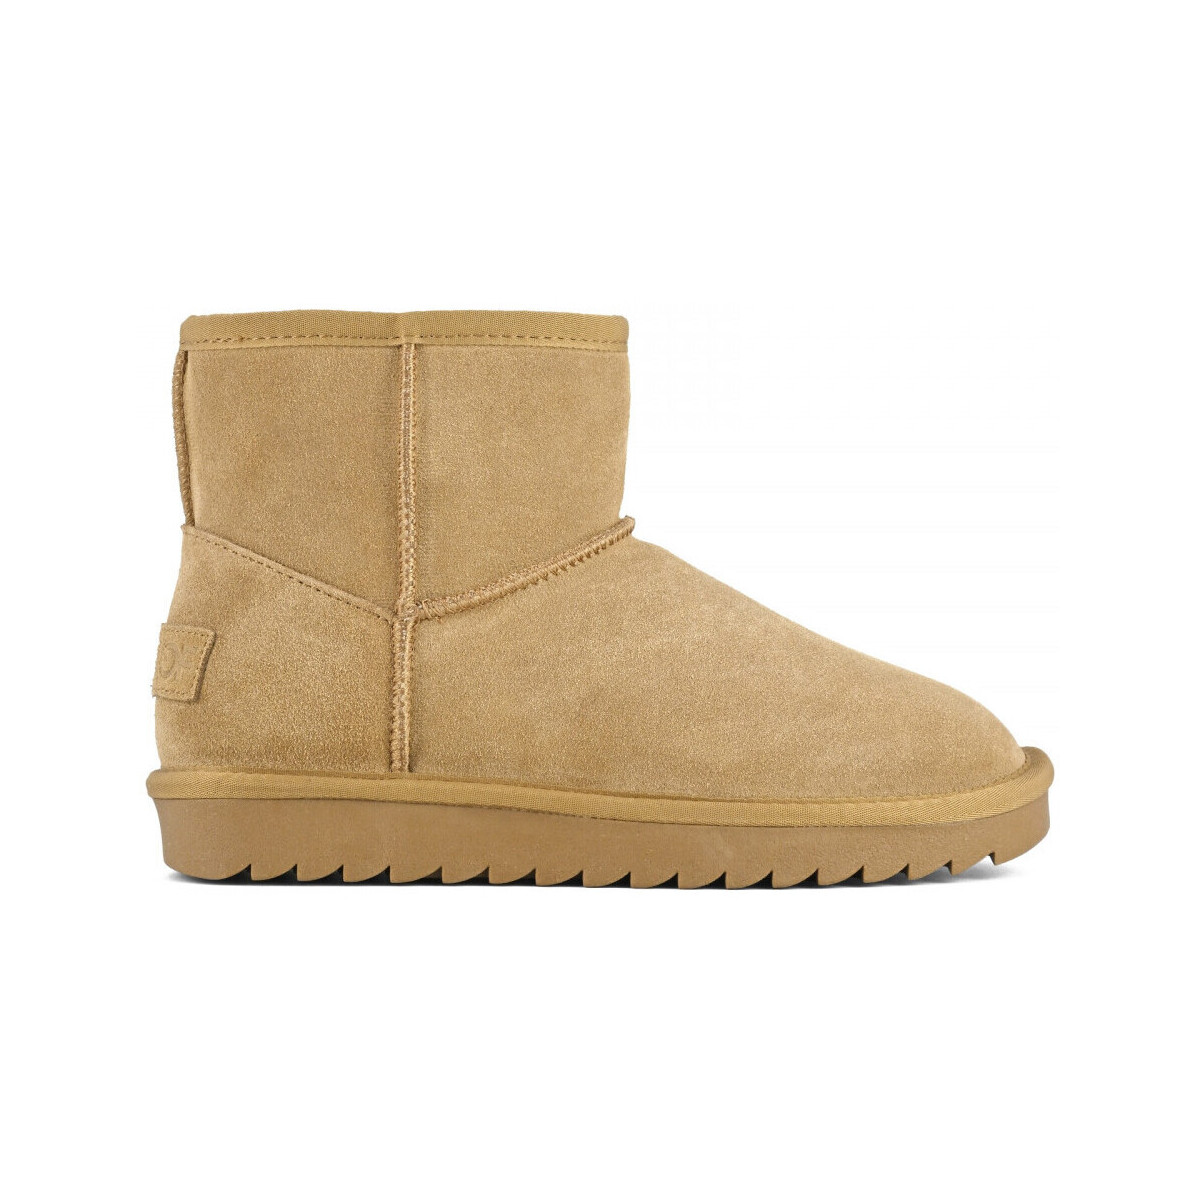 Schuhe Damen Low Boots Colors of California Ugg boot in suede Braun